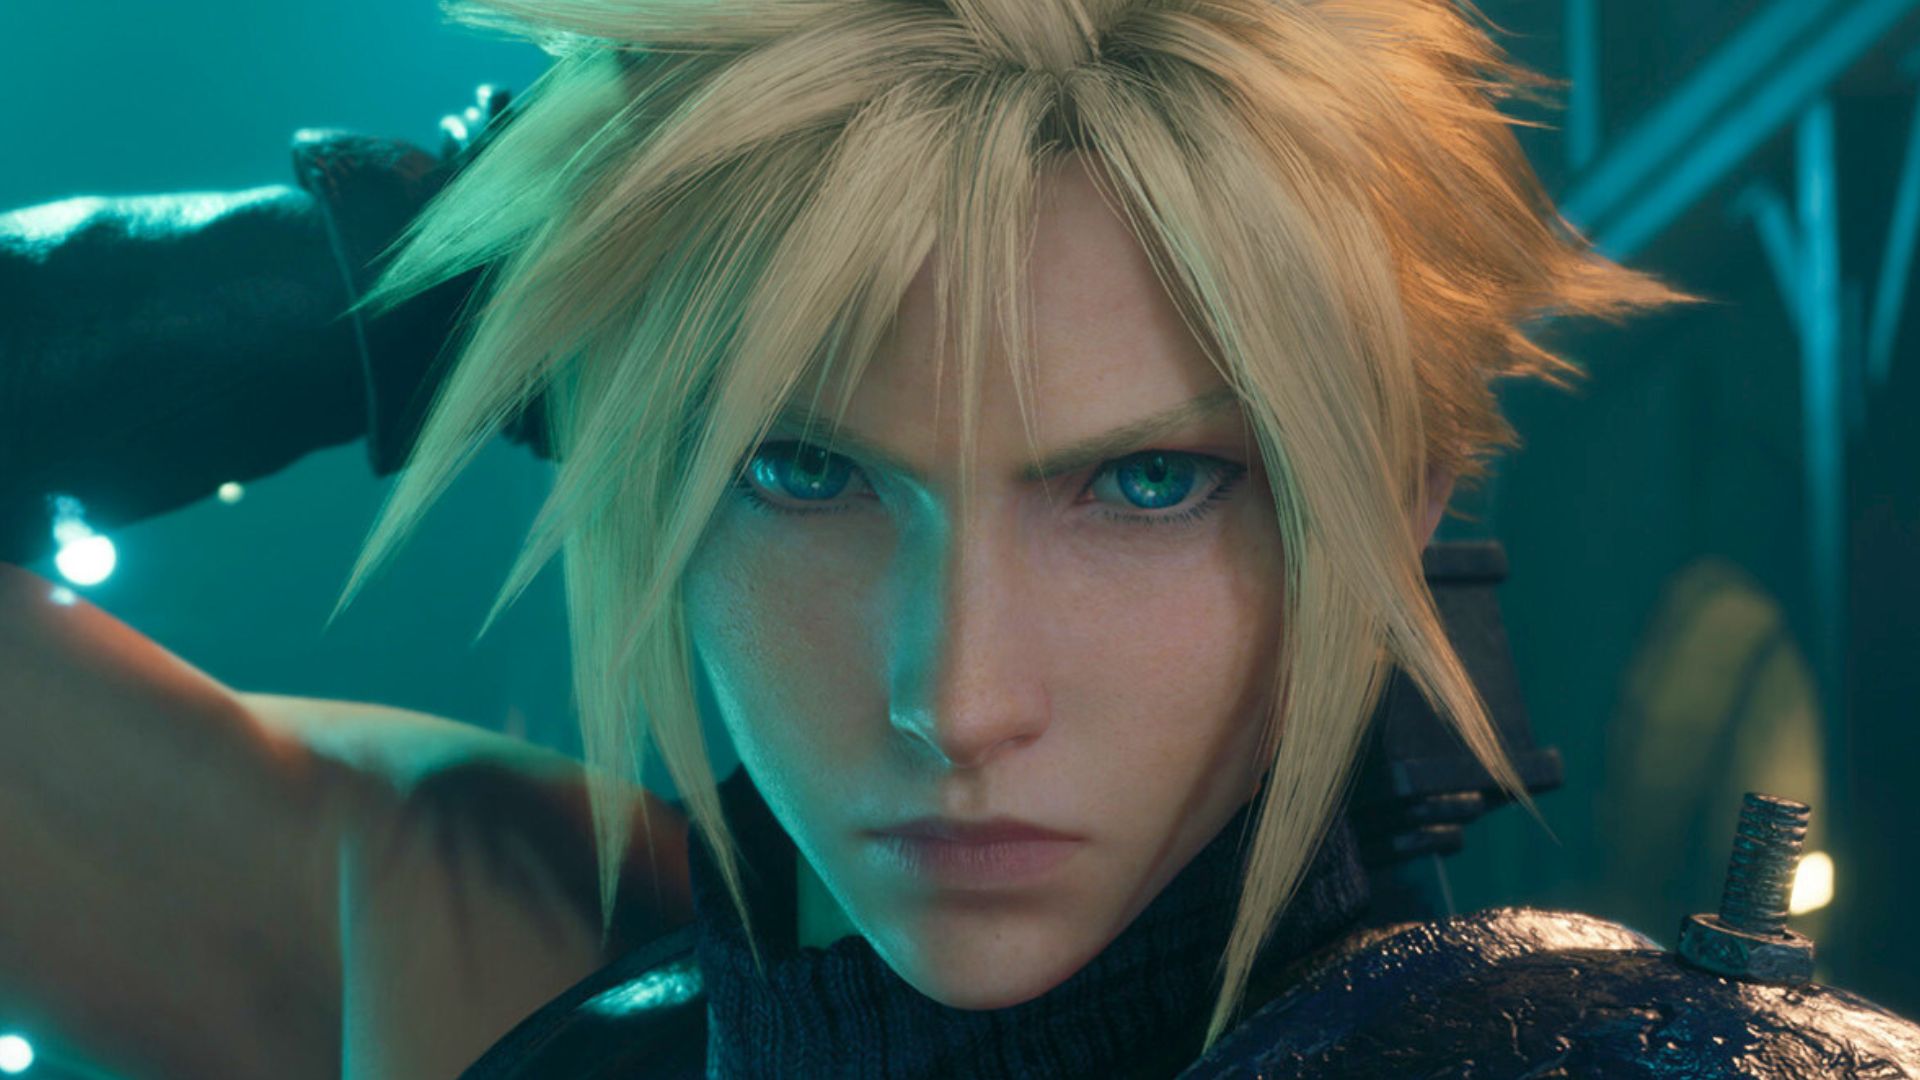 Final Fantasy 7 Remake is yours for cheap as we await Rebirth on PC